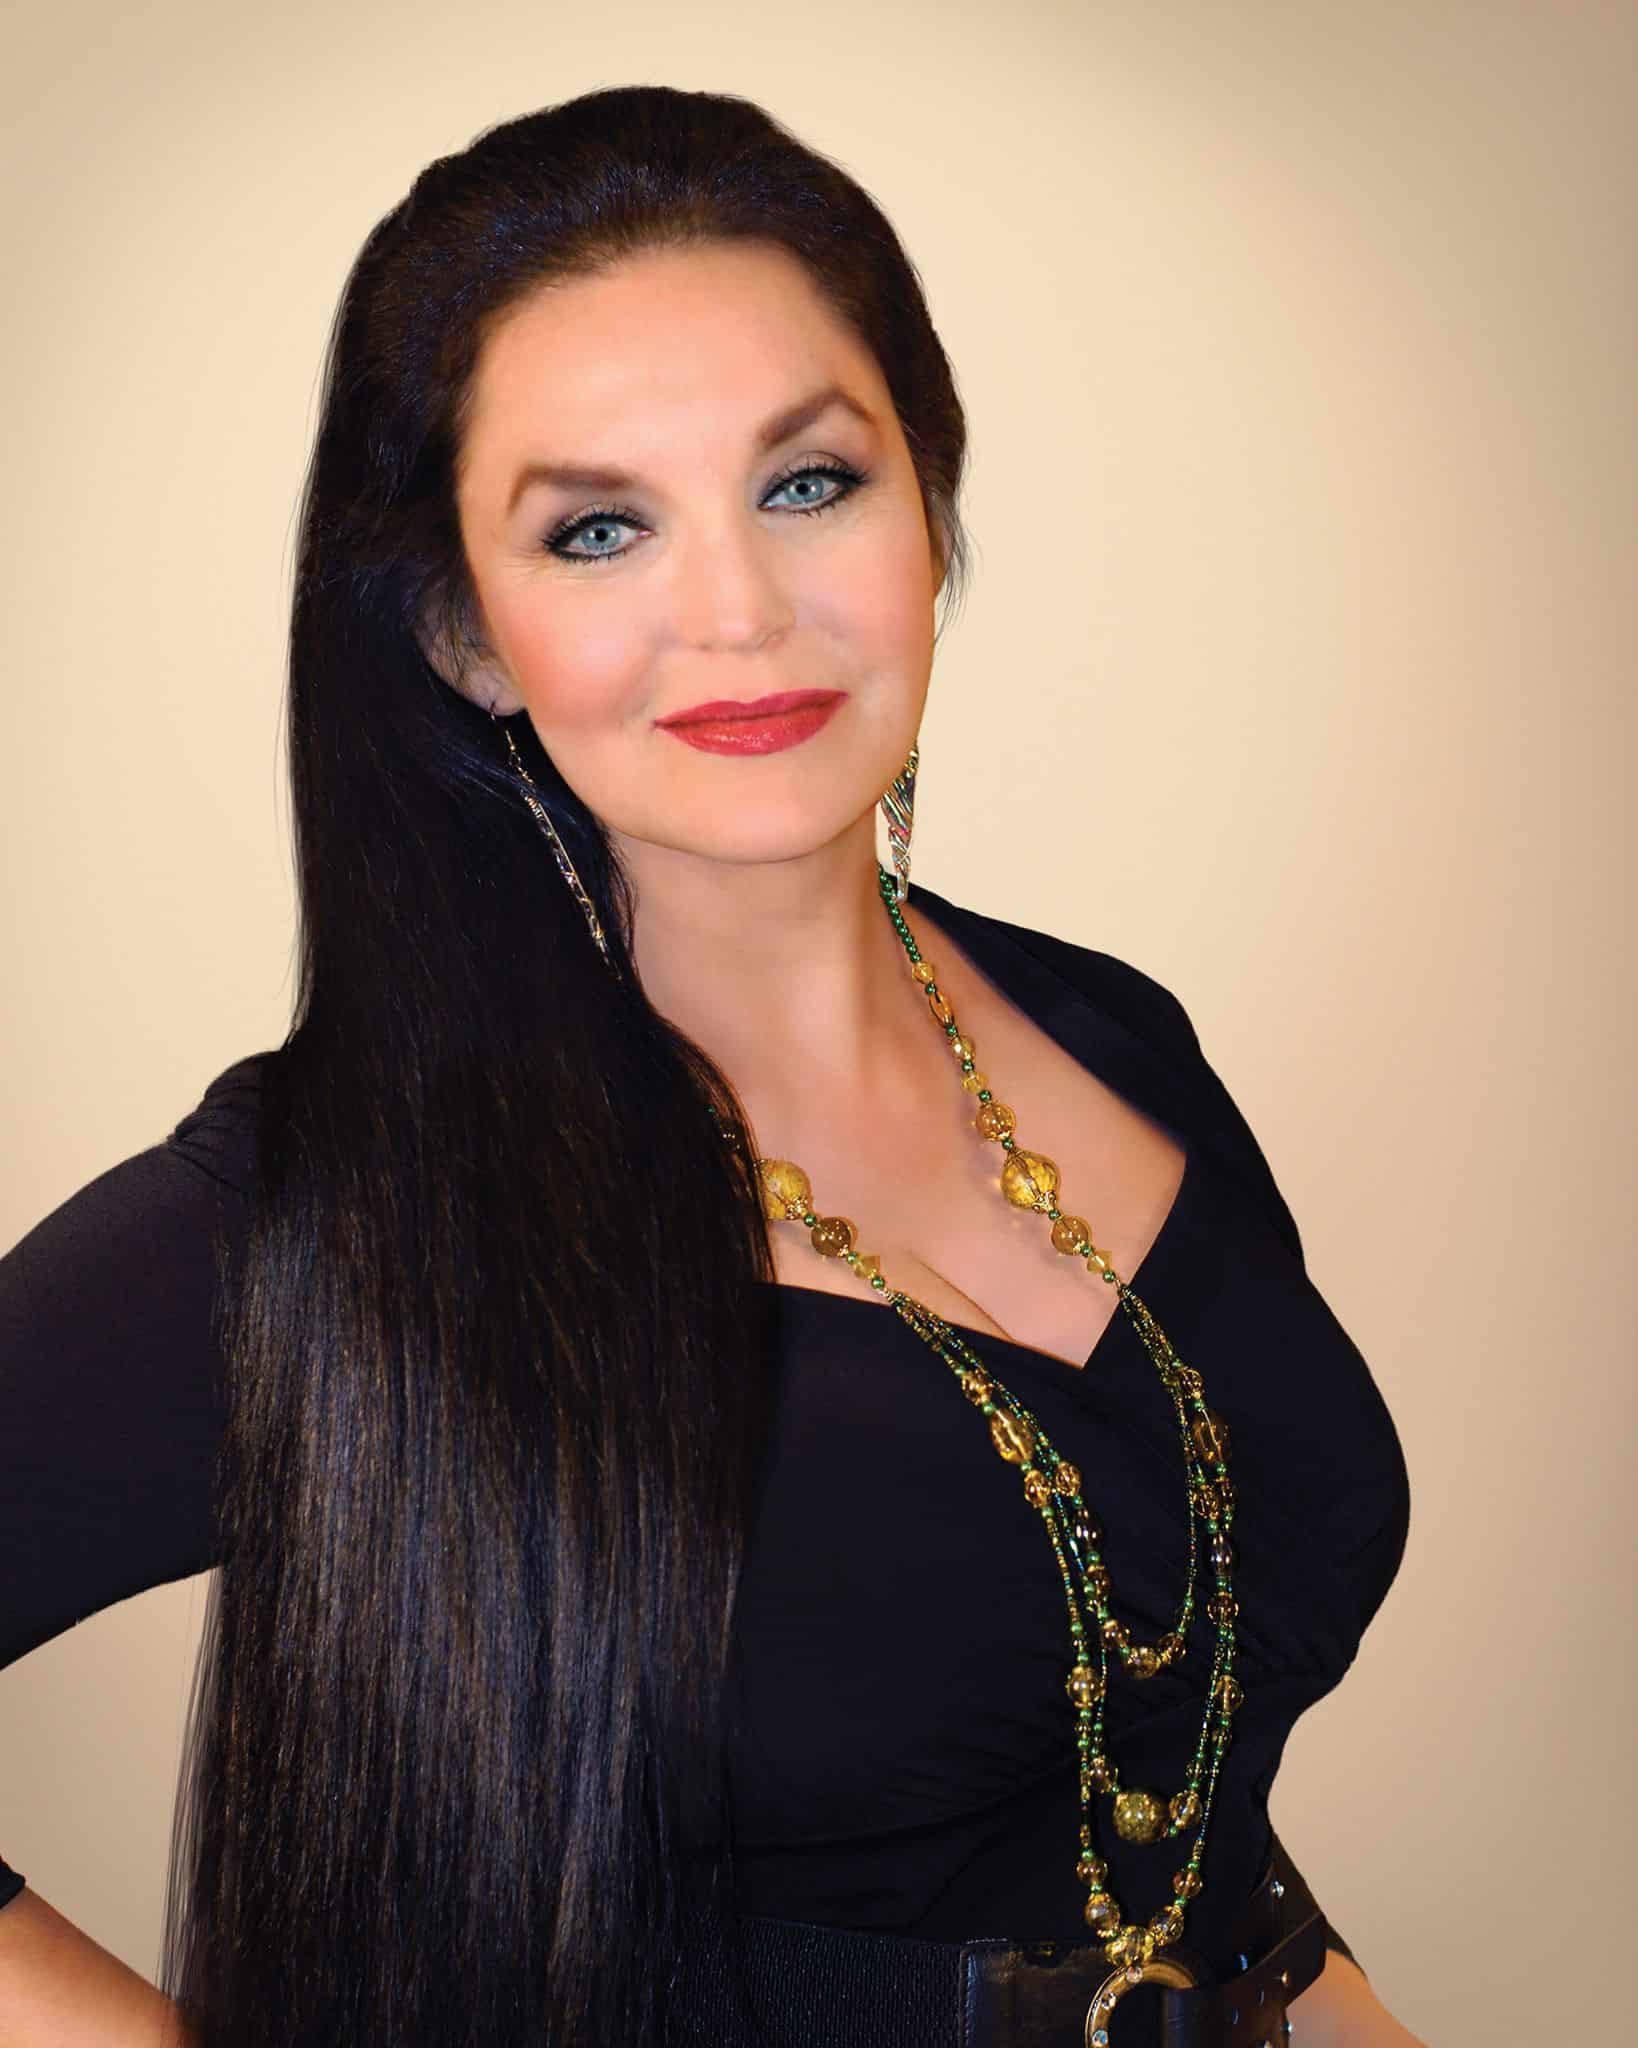 Iconic Country Music Hairstyles - Crystal Gayle's super long hair